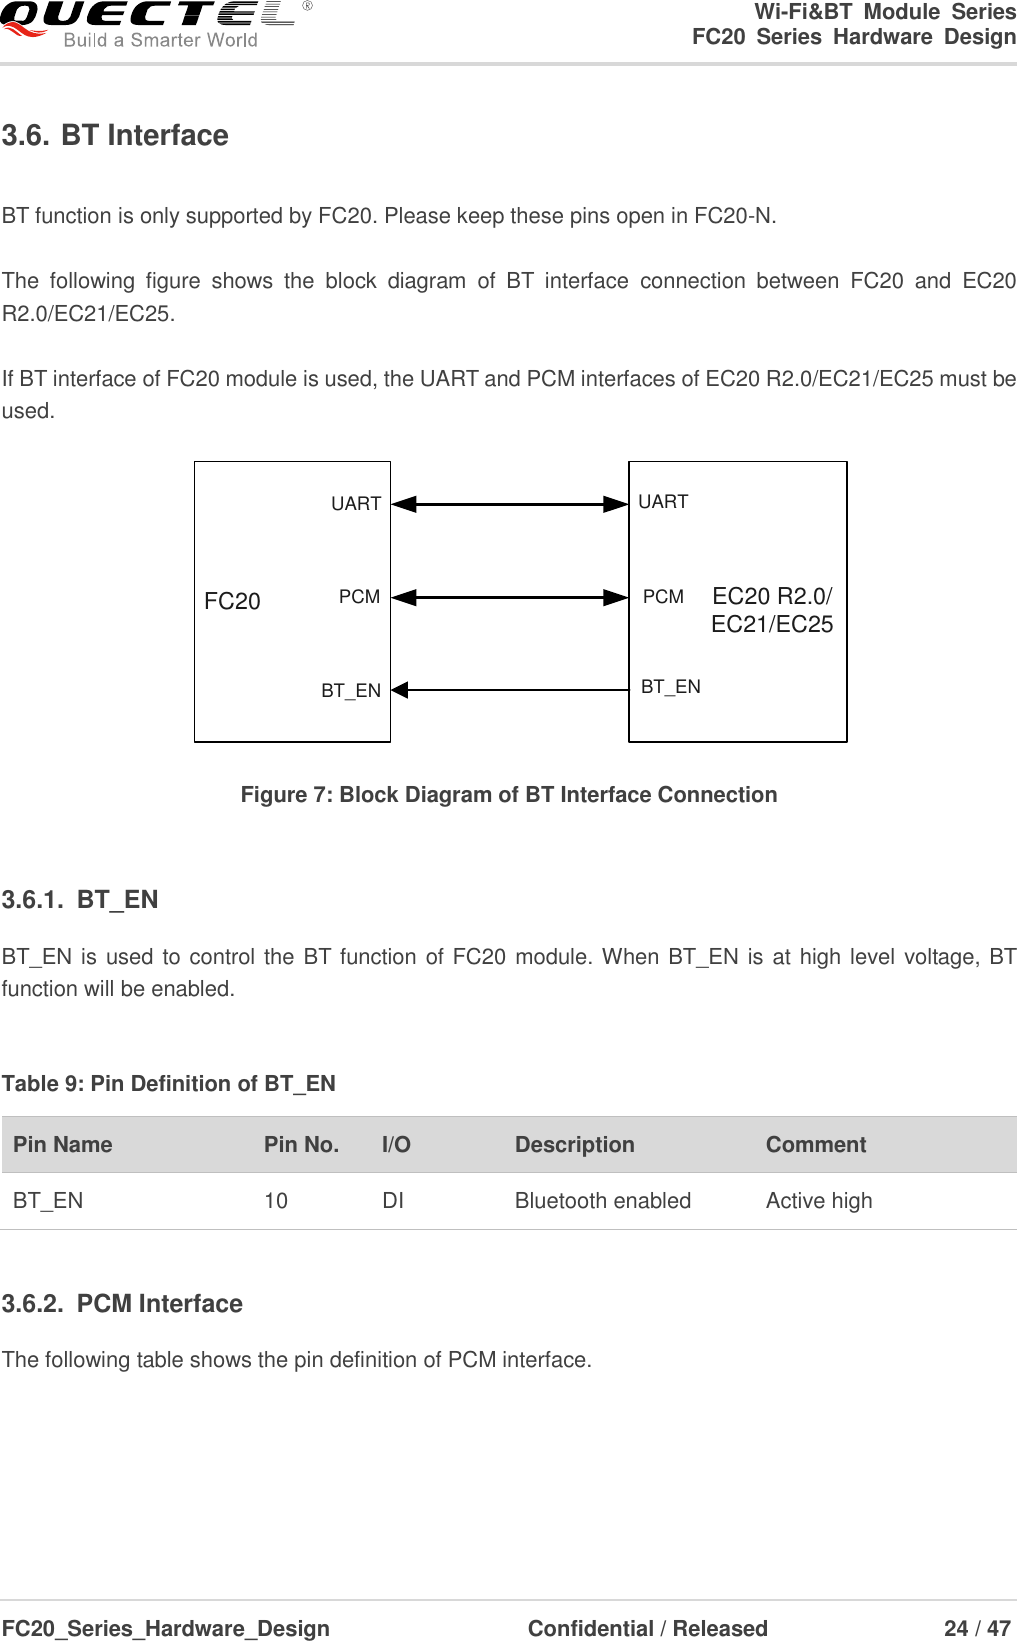                                                                        Wi-Fi&amp;BT  Module  Series                                                               FC20  Series  Hardware  Design  FC20_Series_Hardware_Design                                    Confidential / Released                    24 / 47    3.6. BT Interface  BT function is only supported by FC20. Please keep these pins open in FC20-N.    The  following  figure  shows  the  block  diagram  of  BT  interface connection  between  FC20  and  EC20 R2.0/EC21/EC25.  If BT interface of FC20 module is used, the UART and PCM interfaces of EC20 R2.0/EC21/EC25 must be used.  PCMUARTFC20 UARTPCM EC20 R2.0/EC21/EC25BT_ENBT_EN Figure 7: Block Diagram of BT Interface Connection  3.6.1.  BT_EN BT_EN is used to control the BT function of FC20 module. When BT_EN is at high level voltage, BT function will be enabled.    Table 9: Pin Definition of BT_EN Pin Name   Pin No. I/O Description Comment BT_EN 10 DI Bluetooth enabled Active high  3.6.2.  PCM Interface The following table shows the pin definition of PCM interface.   